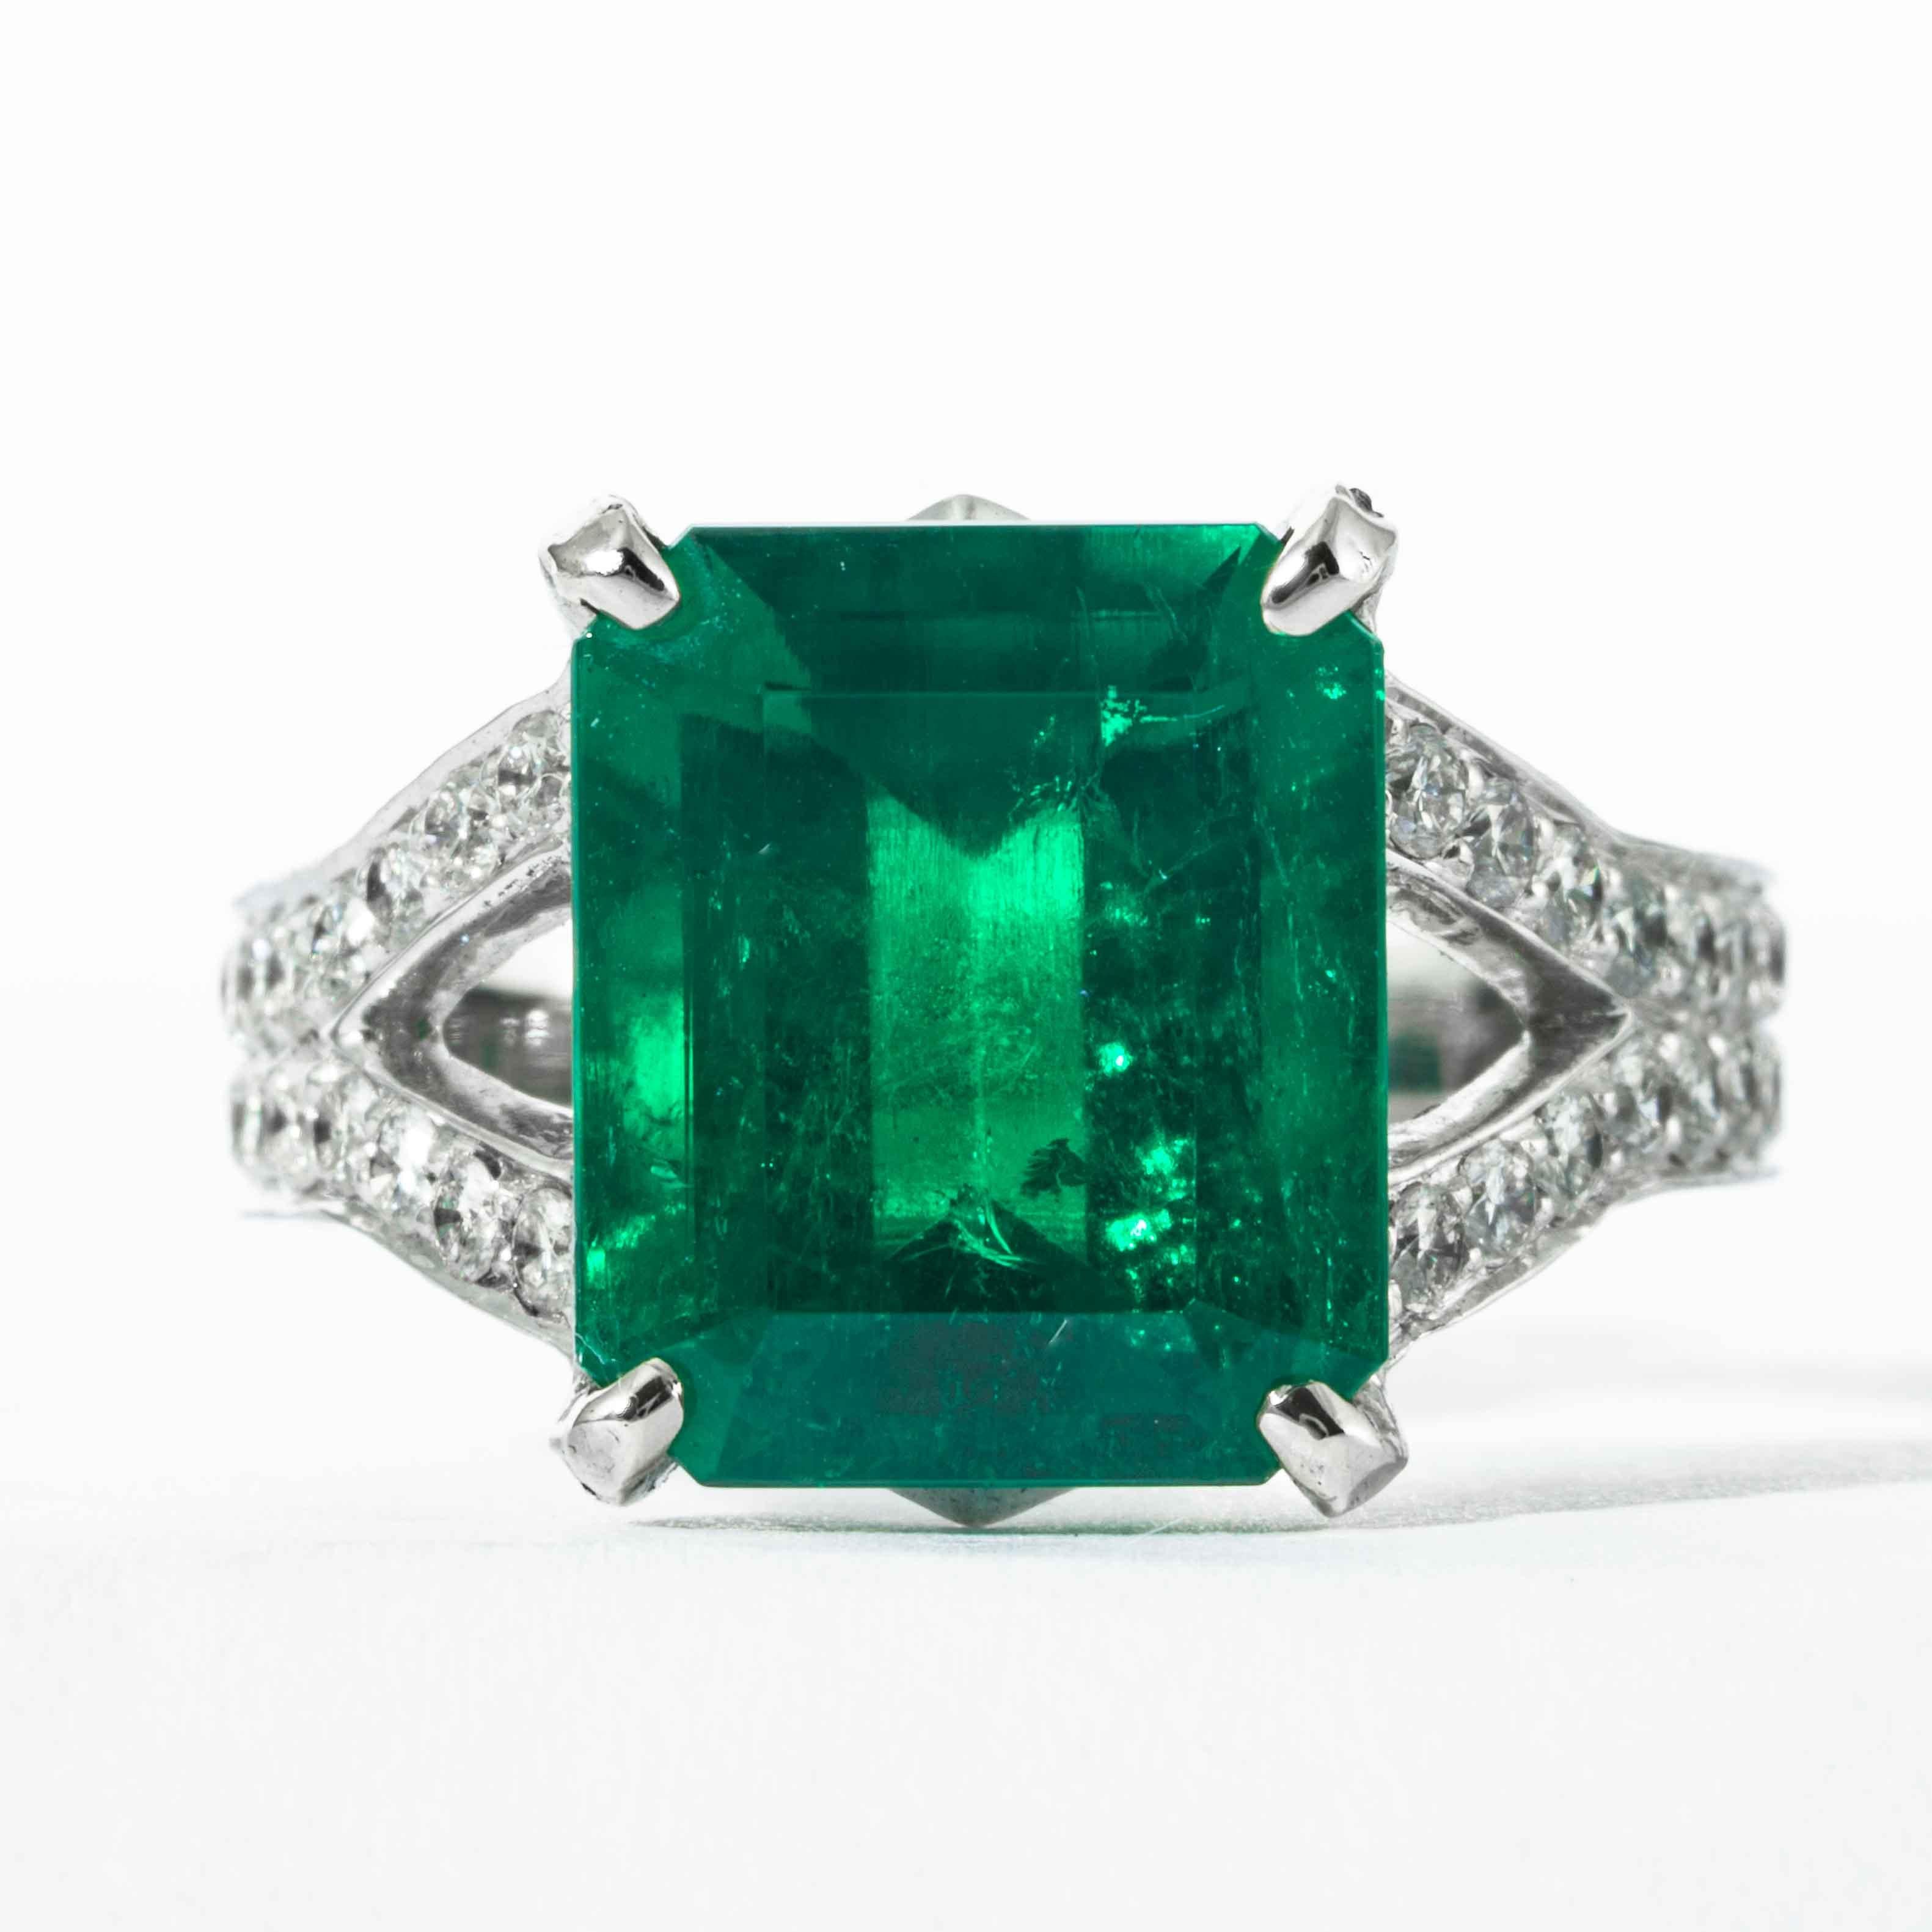 This emerald ring is offered by Shreve, Crump & Low. This green emerald cut emerald is custom set in a handcrafted Shreve, Crump & Low one-of-kind 18kt white gold ring, consisting of one green emerald cut emerald weighing 6.25 carats of Colombian